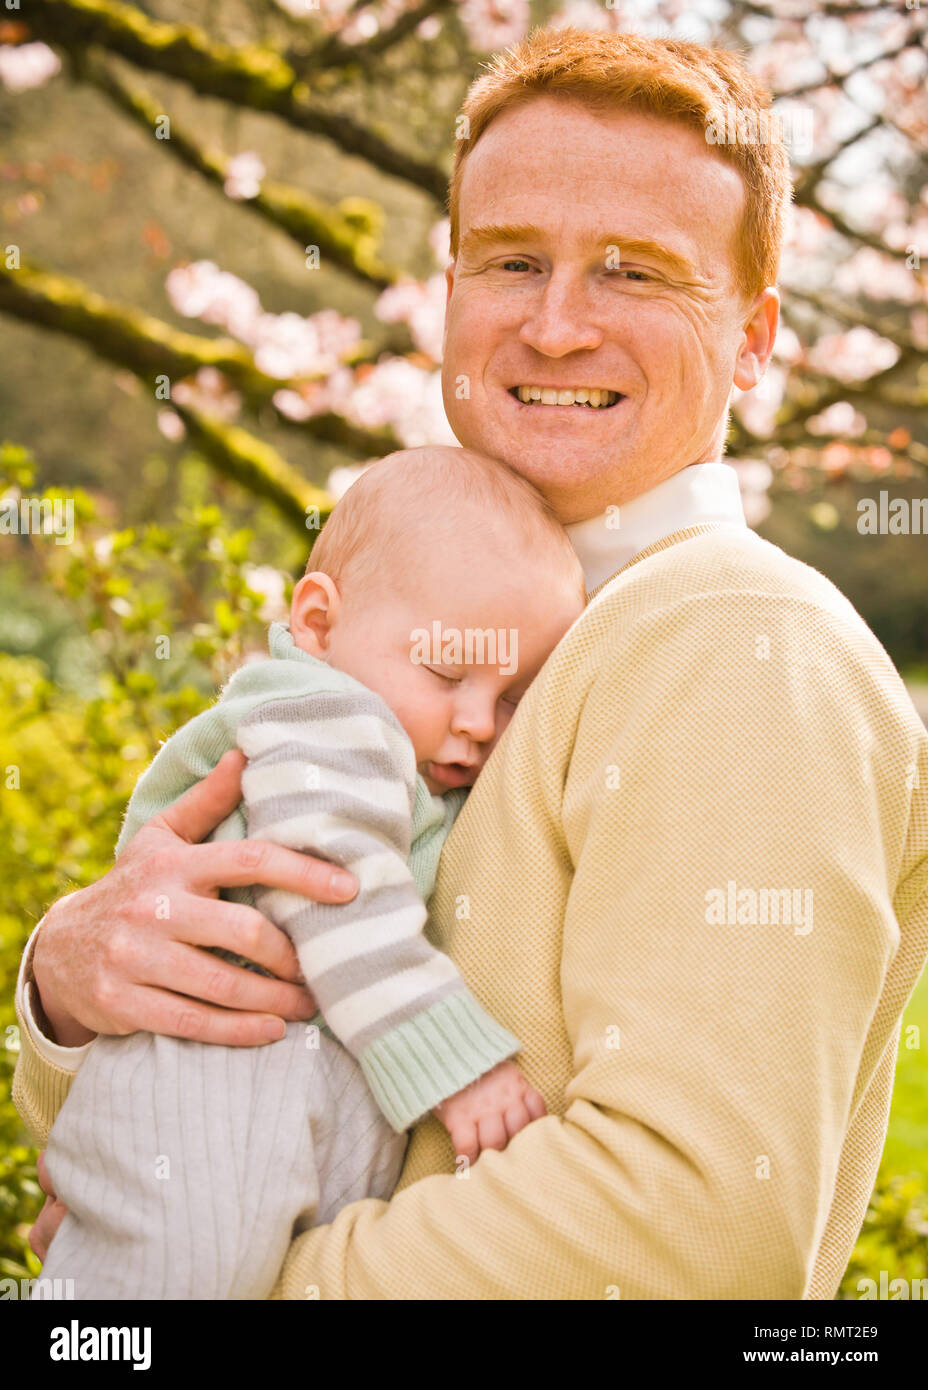 A portrait of a father with his 10 month old son outdoors in a Spring like location. Stock Photo